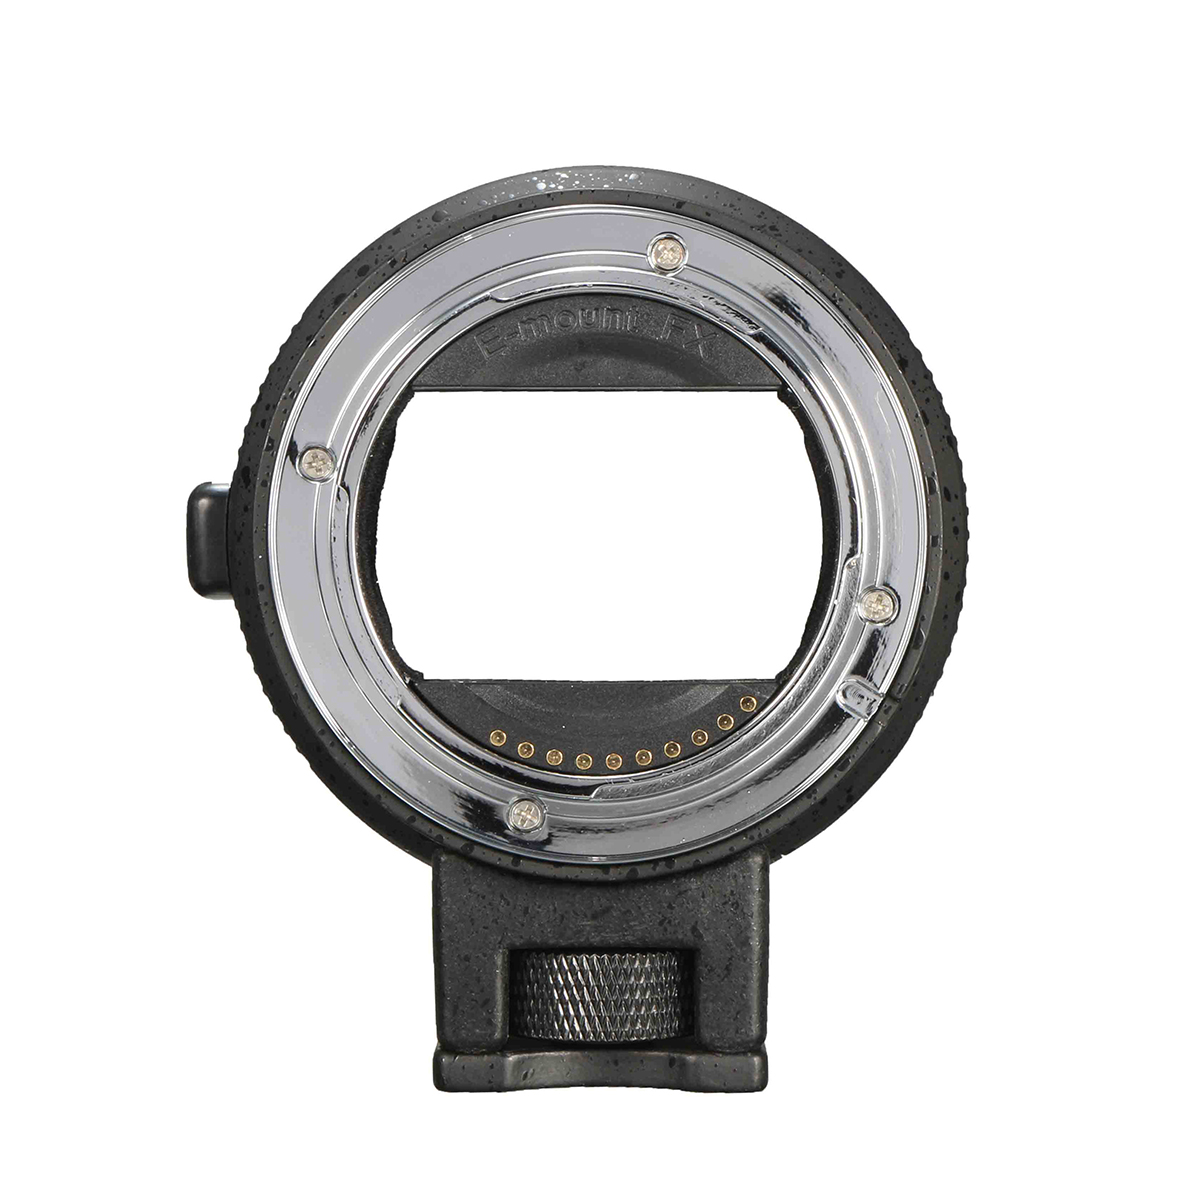 

Auto Focus Adapter For Canon EOS EF Mount Lens To Sony NEX A7 A7R NEX-6